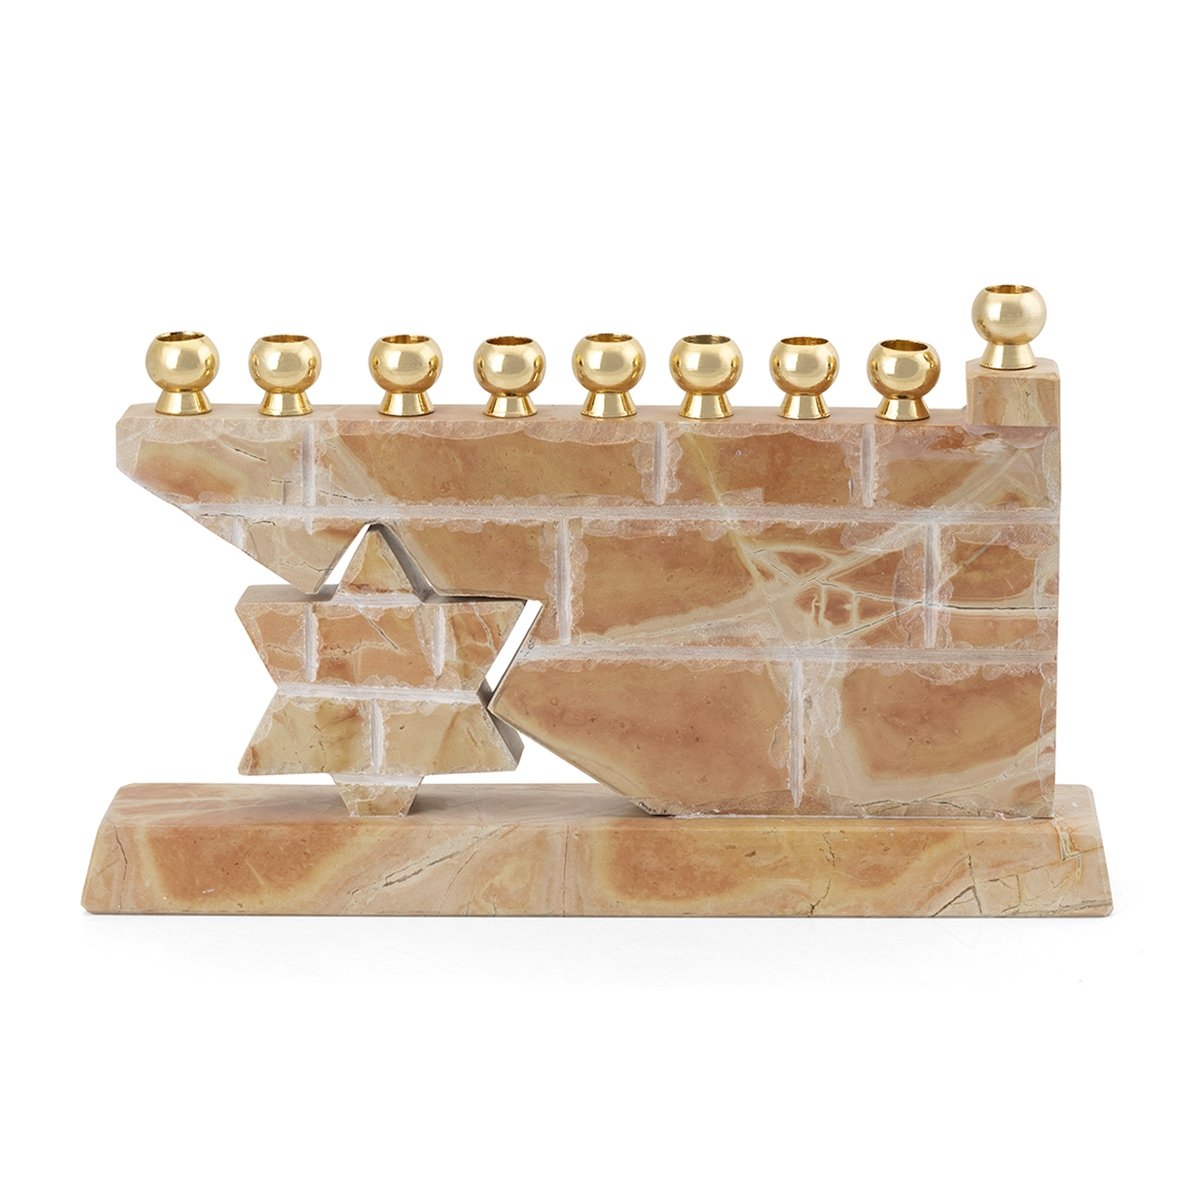 Top 10 Hanukkah Gifts for Him from Israel